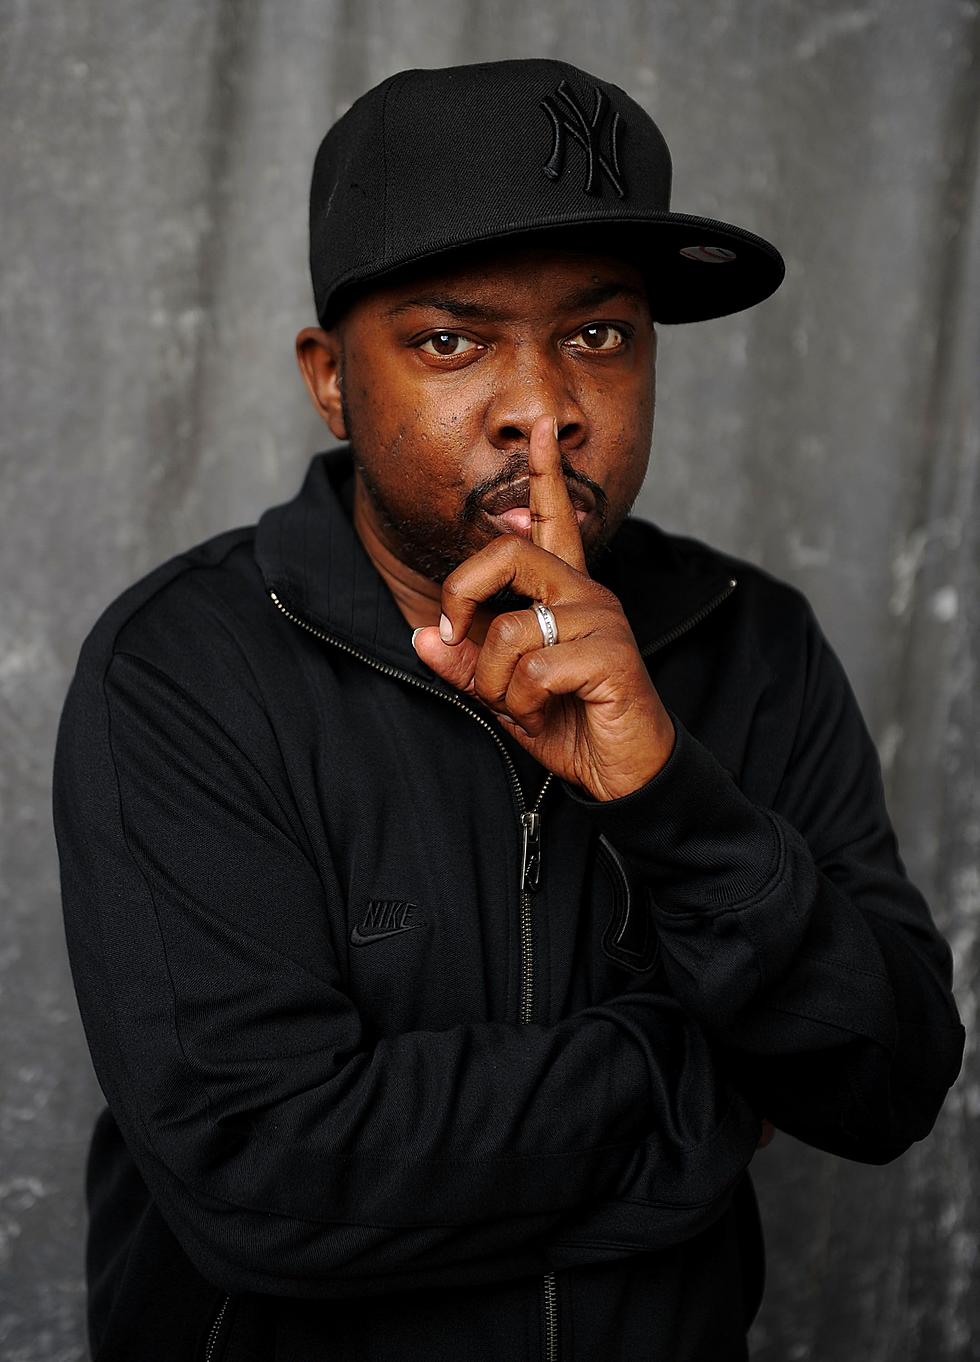 Recording artist Phife Dawg of A Tribe Called Quest visits the Tribeca Film Festival 2011 portrait studio on April 27, 2011 in New York City.